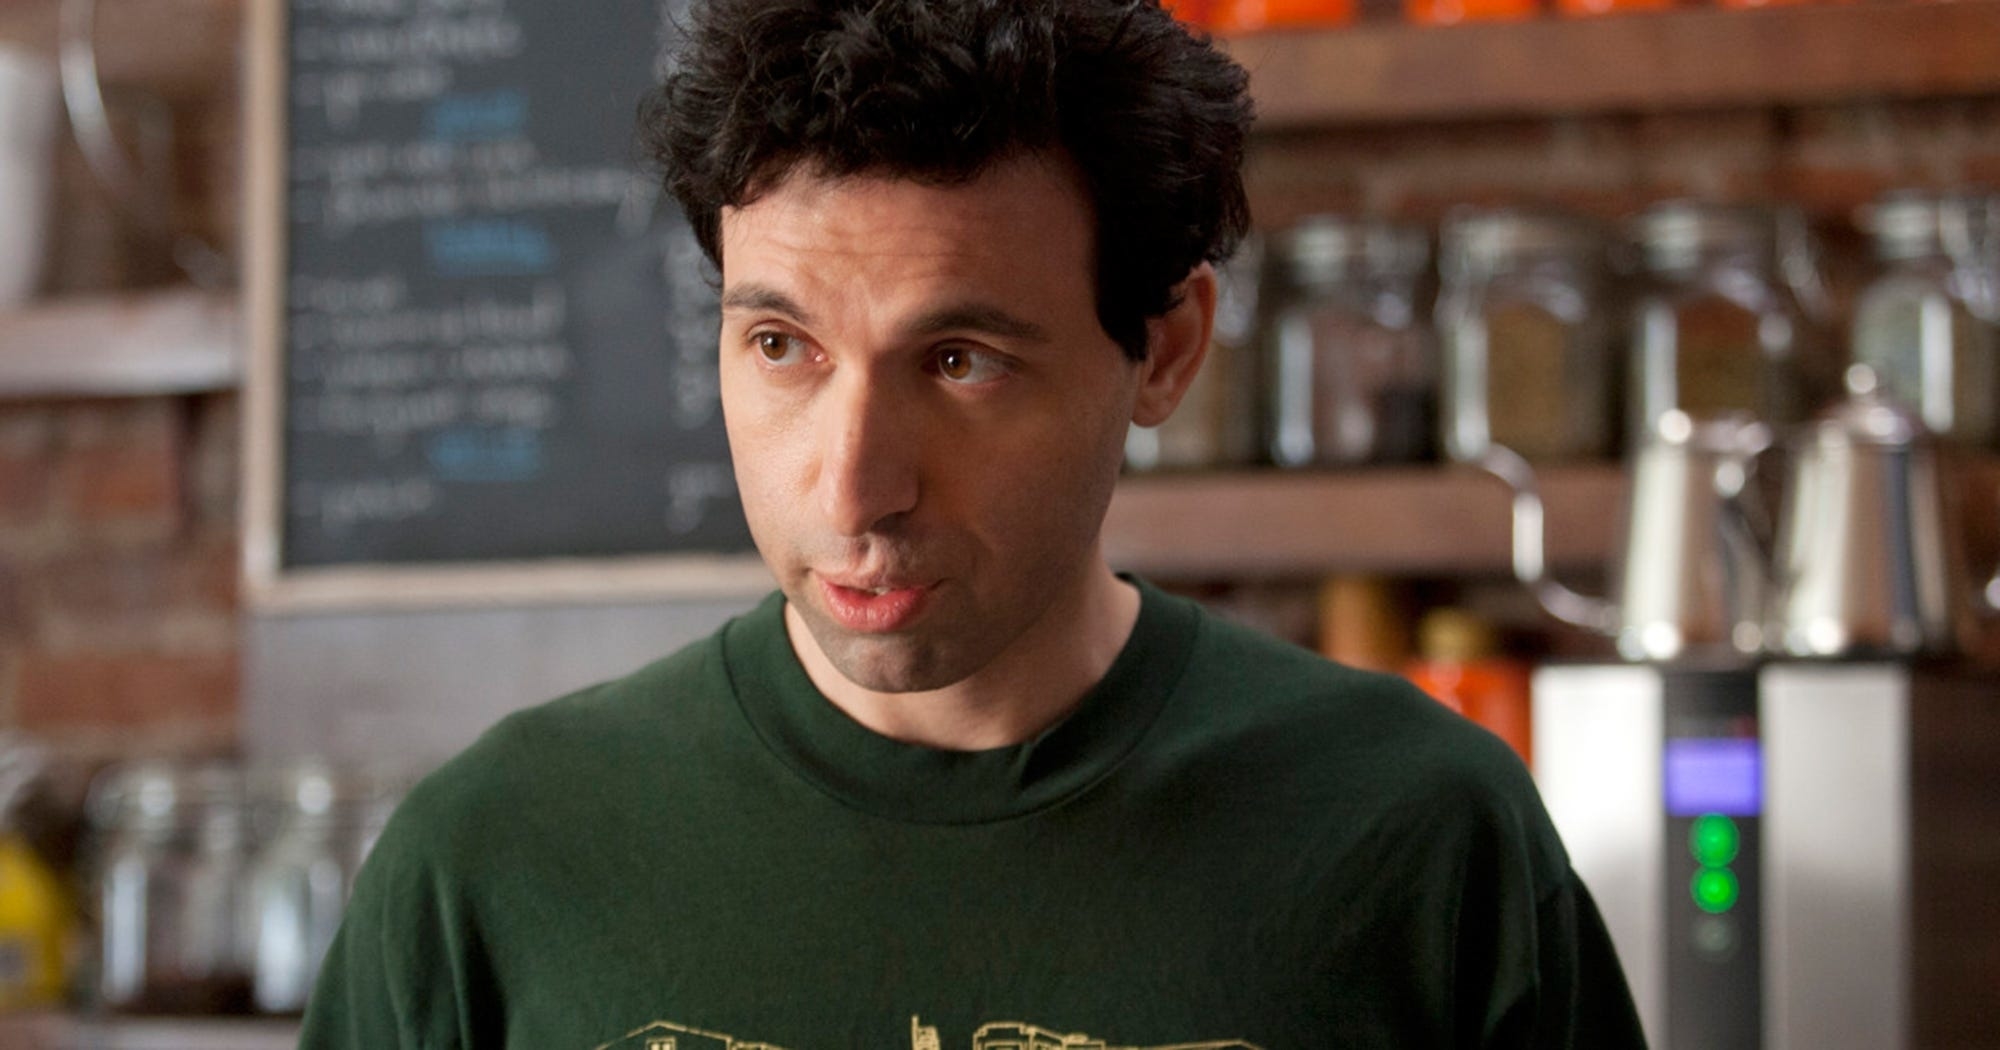 Character in a kitchen setting wearing a green t-shirt, portrayed with a puzzled expression